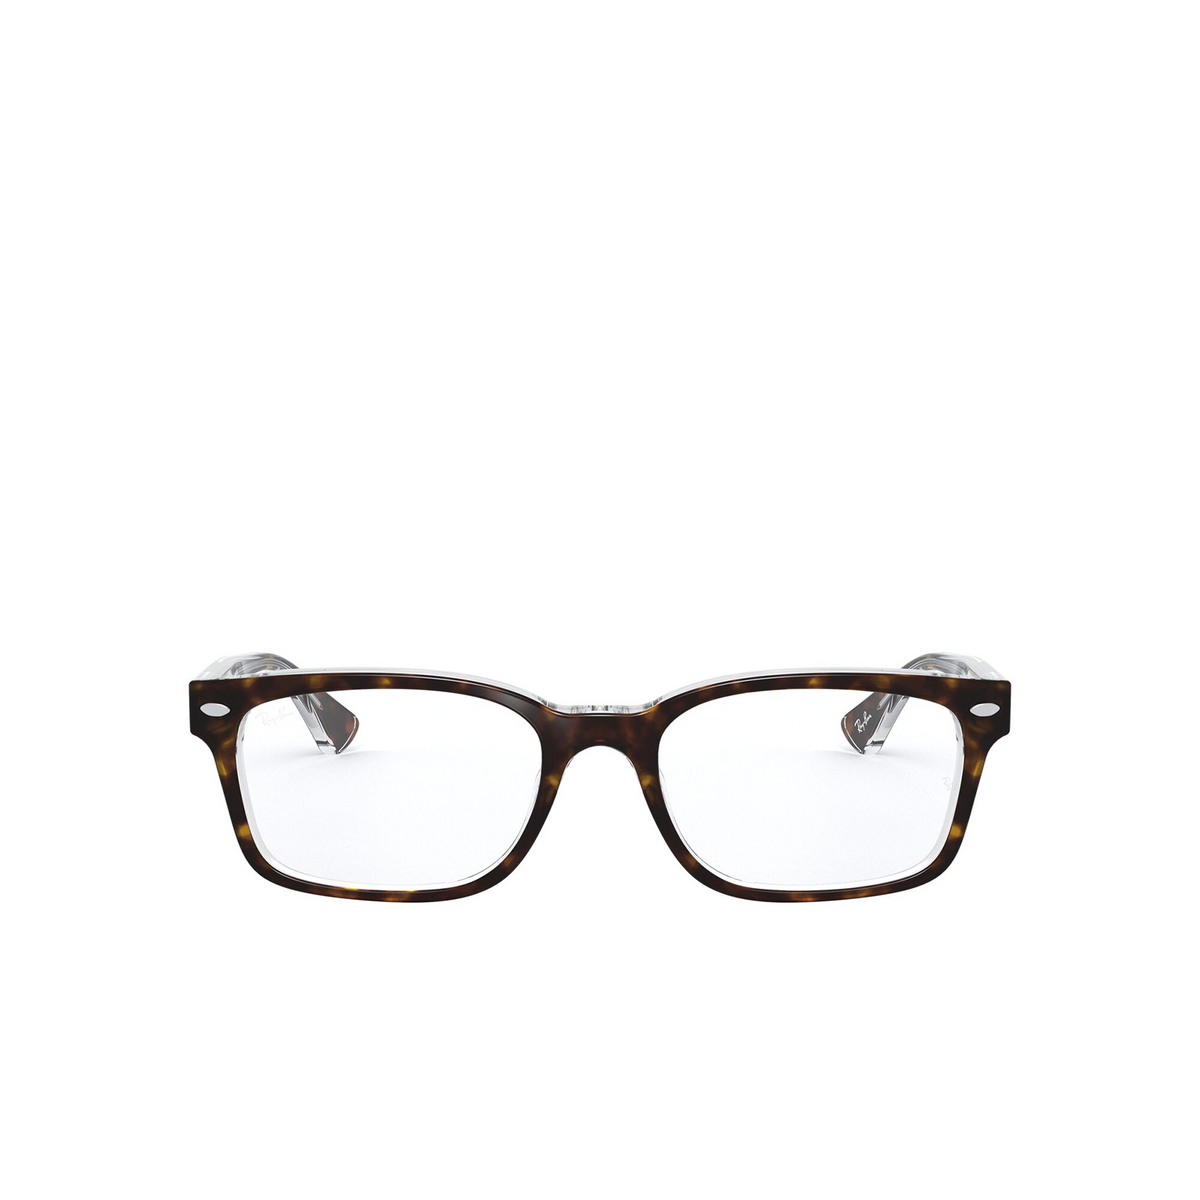 Ray-Ban® Square Eyeglasses: RX5286 color Havana On Transparent 5082 - front view.